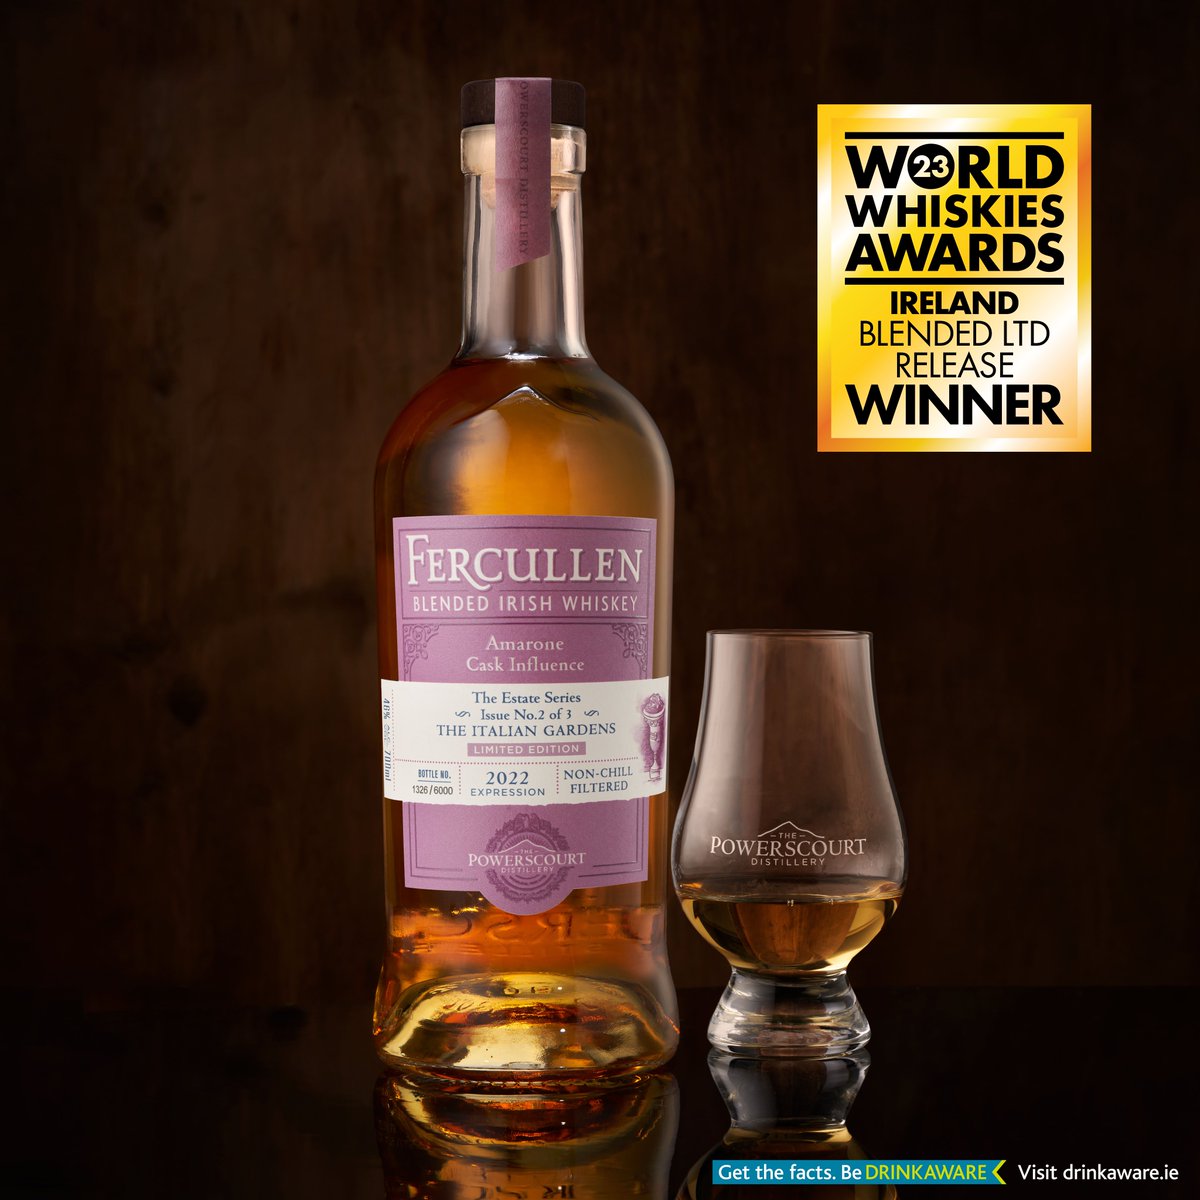 Double triumph at the prestigious World Whiskies Awards in London last night // 🏆 Best Irish Single Grain for our Distillery Select // 🏆 Best Irish Blended Limited Release for The Estate Series: The Italian Gardens.